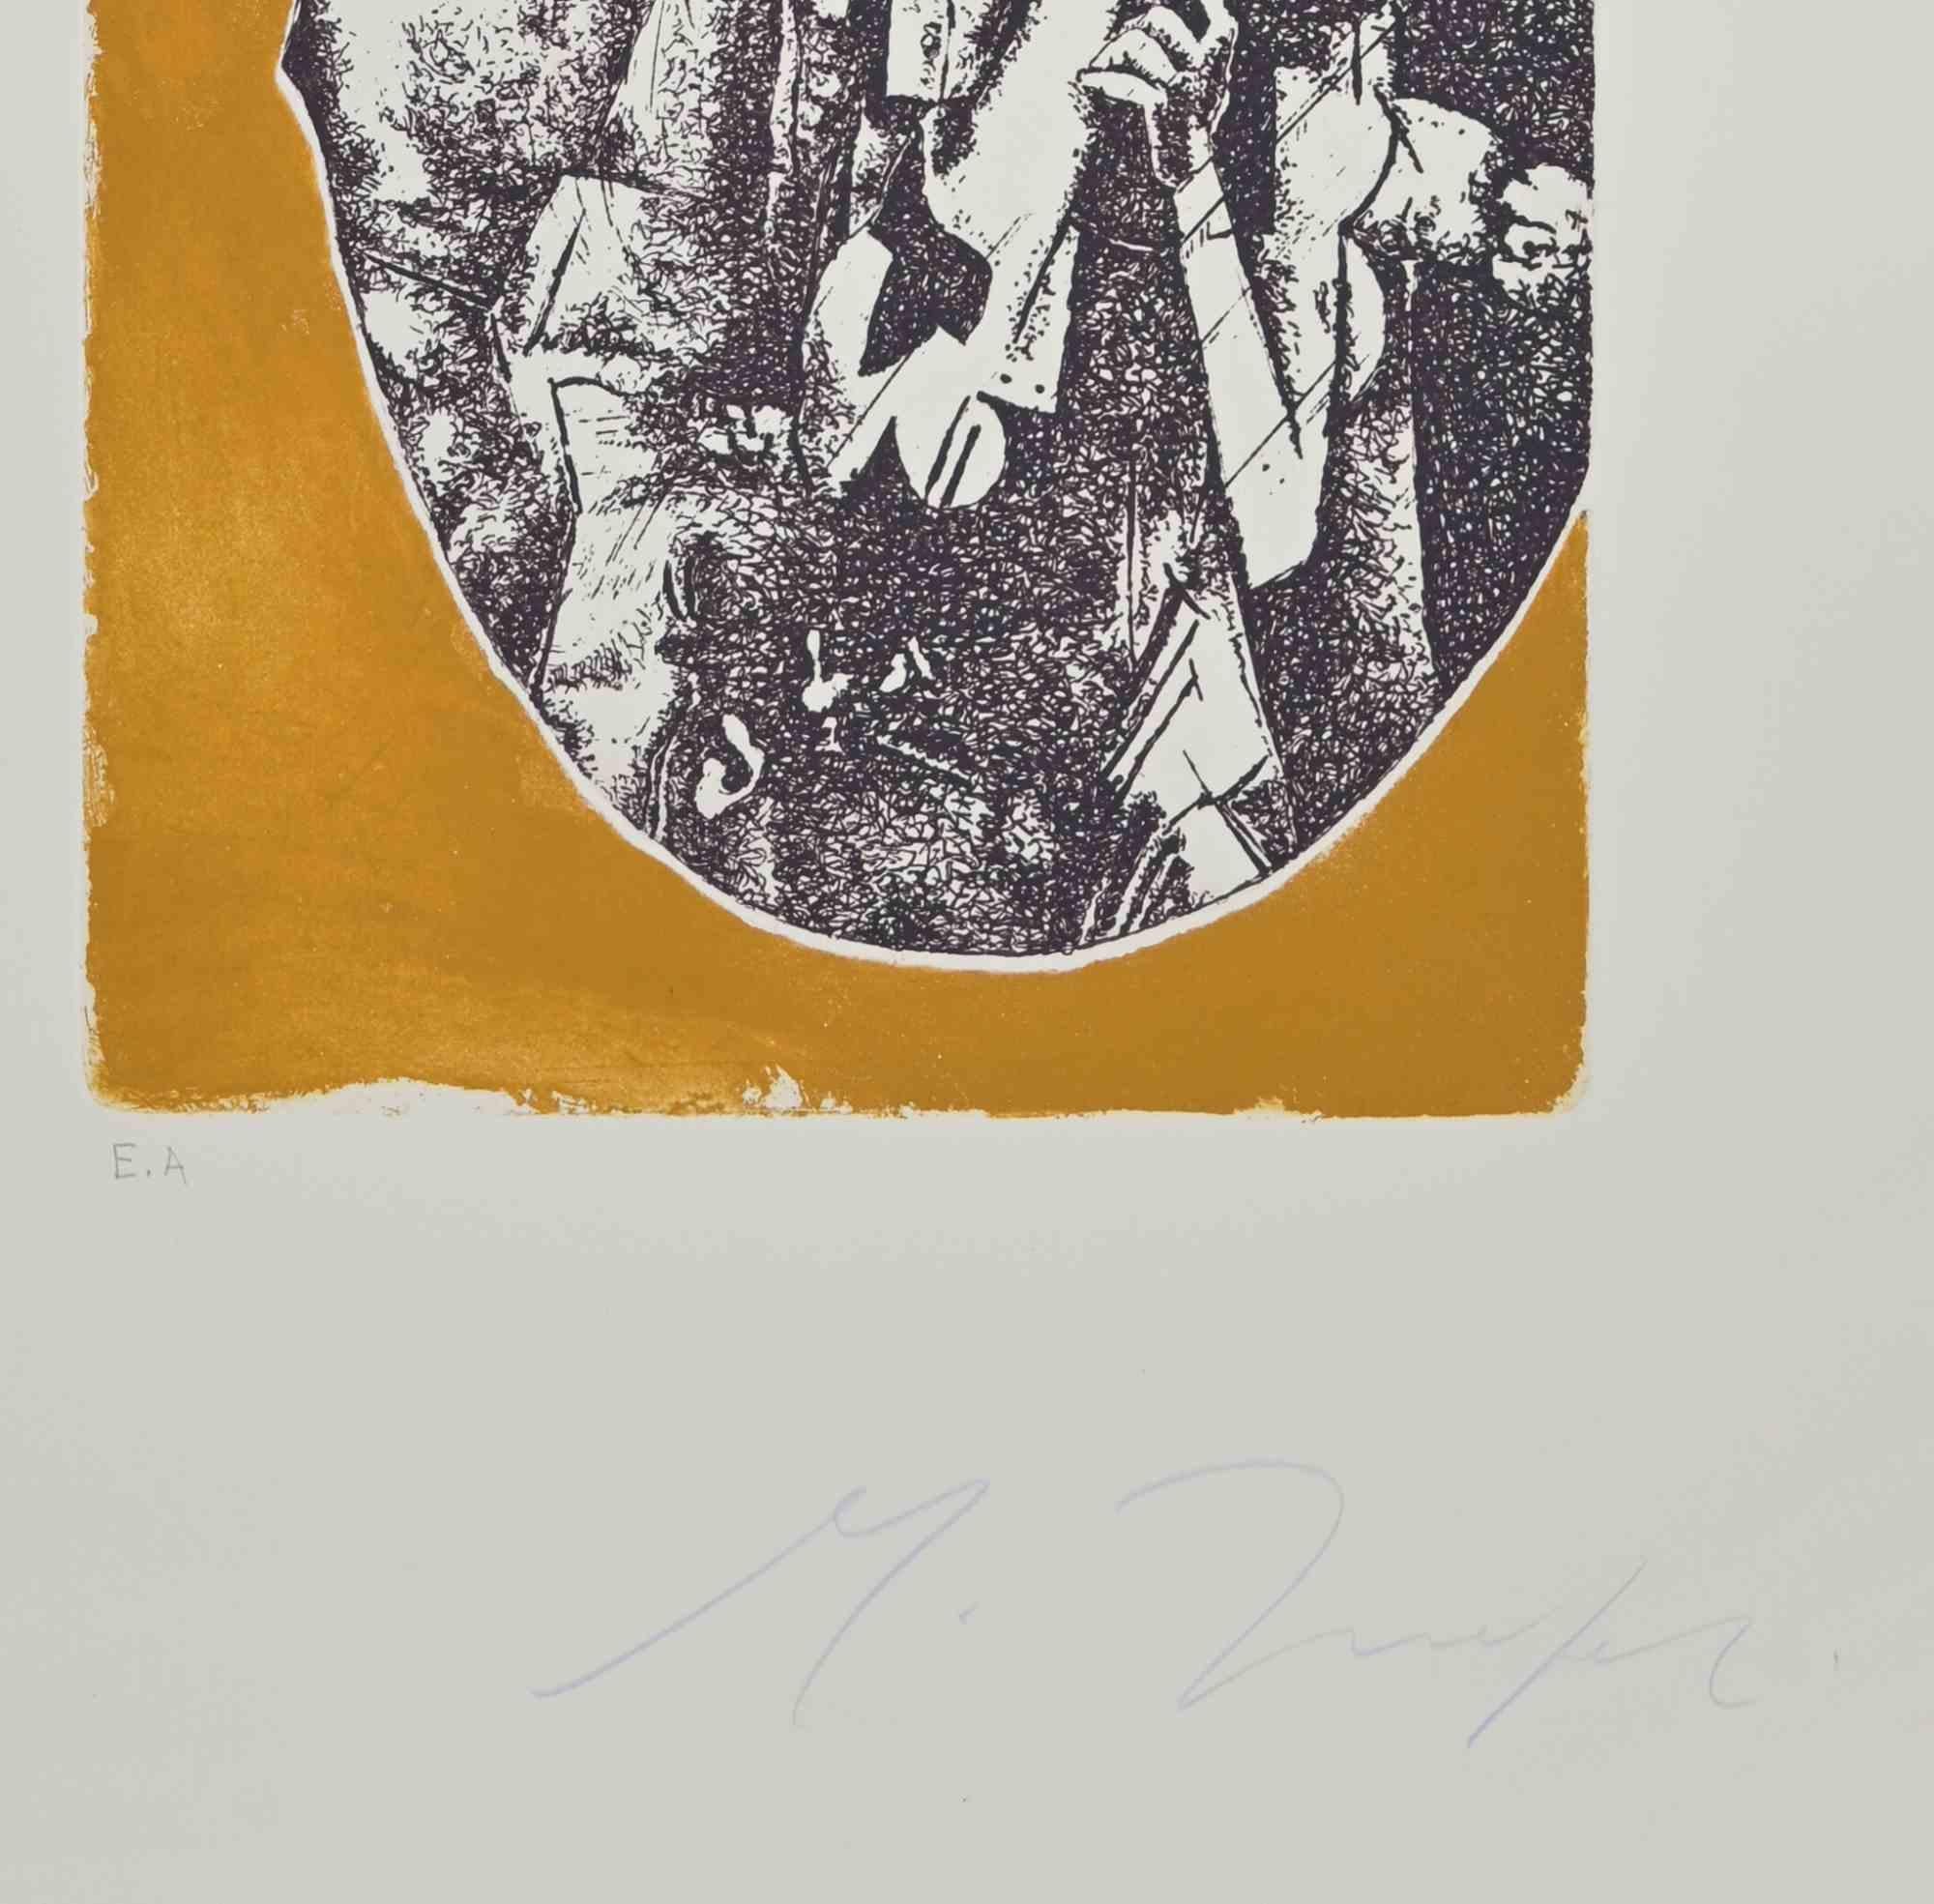 Etching, numbered and signed, by the Italian artist Mino Trafeli (Volterra, Italy 1922-2018). This important print is dedicate to Georges Braque.

From the album Rivoluzione, composed of 6 engravings made by M. Trafeli and printed at La Stamperia,